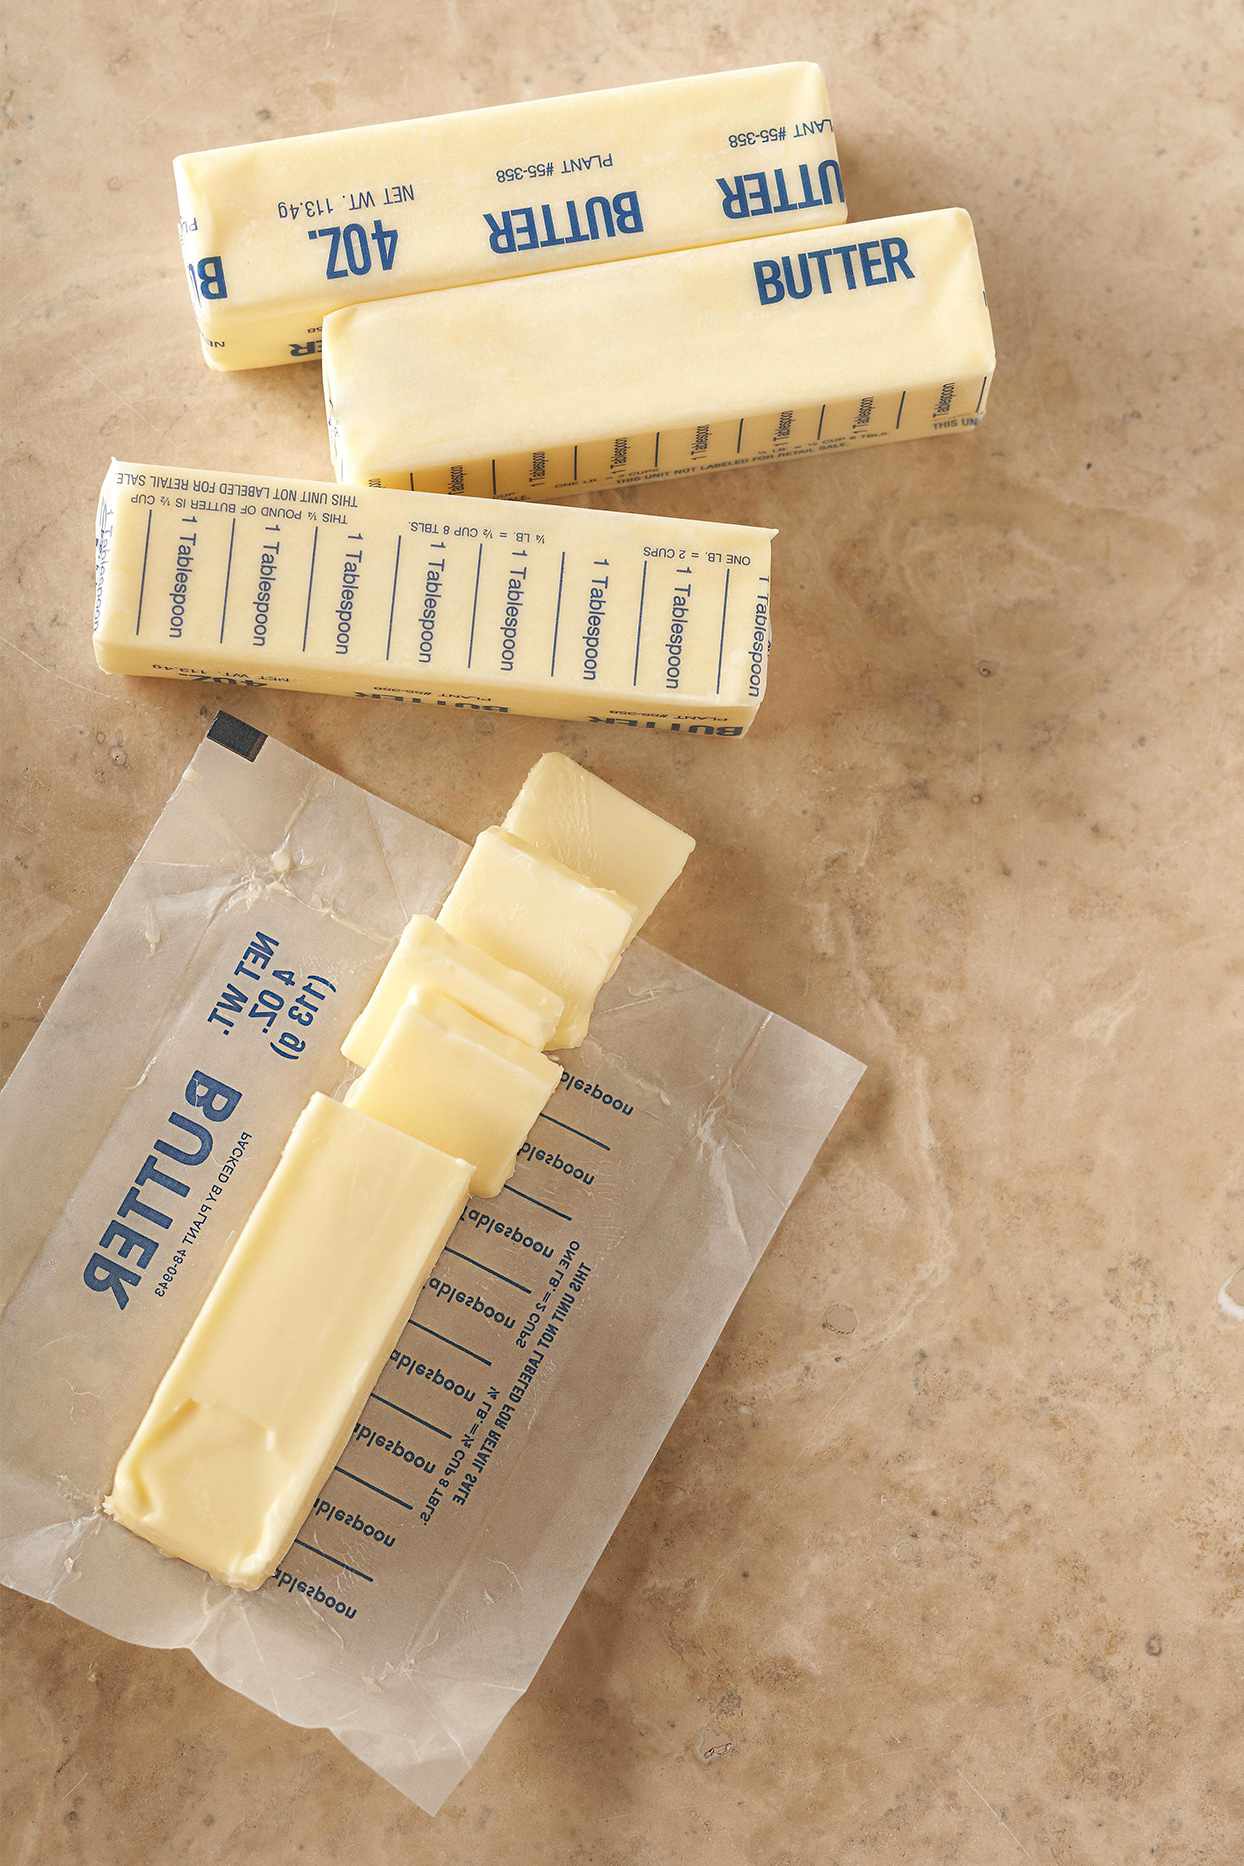 The butter in grams is equal to the cups multiplied by 226.7968. 